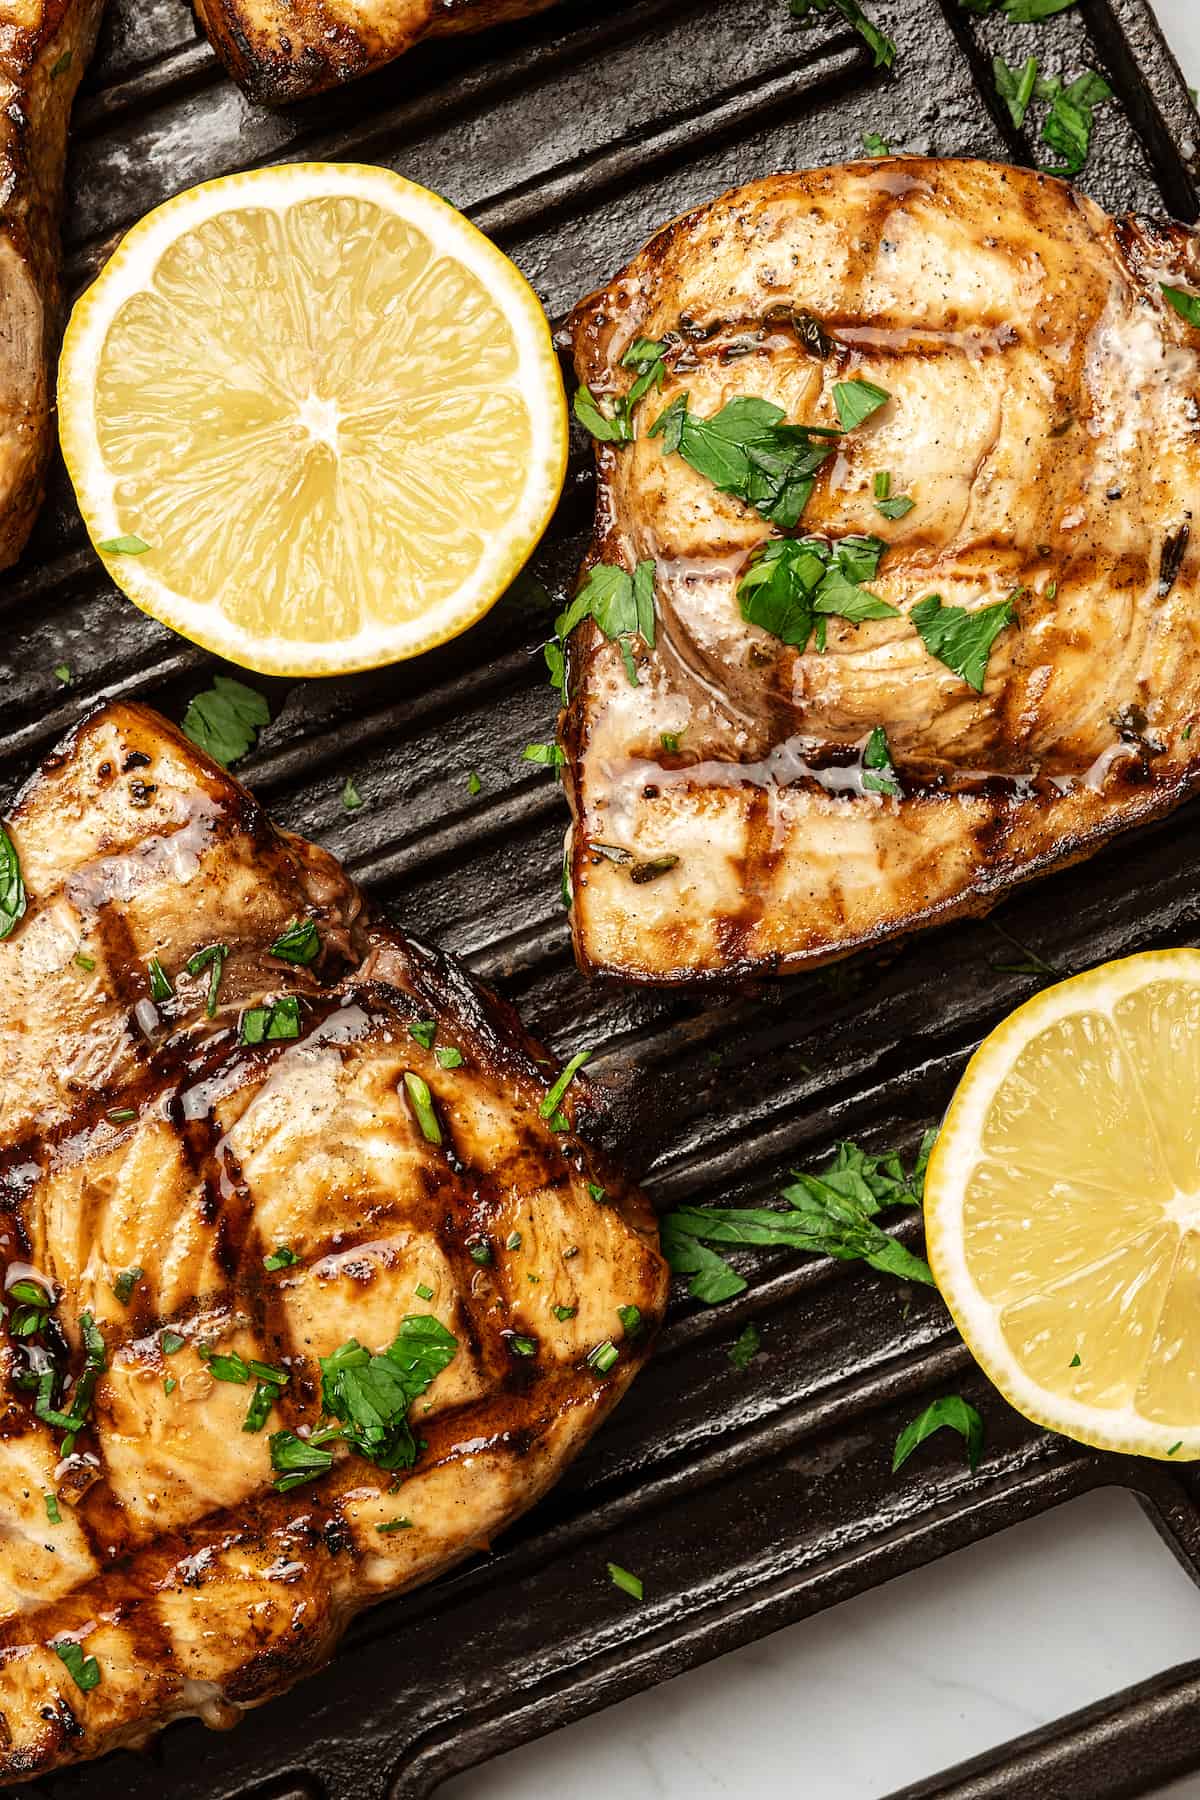 Cooked swordfish steaks on a grill with lemon slices